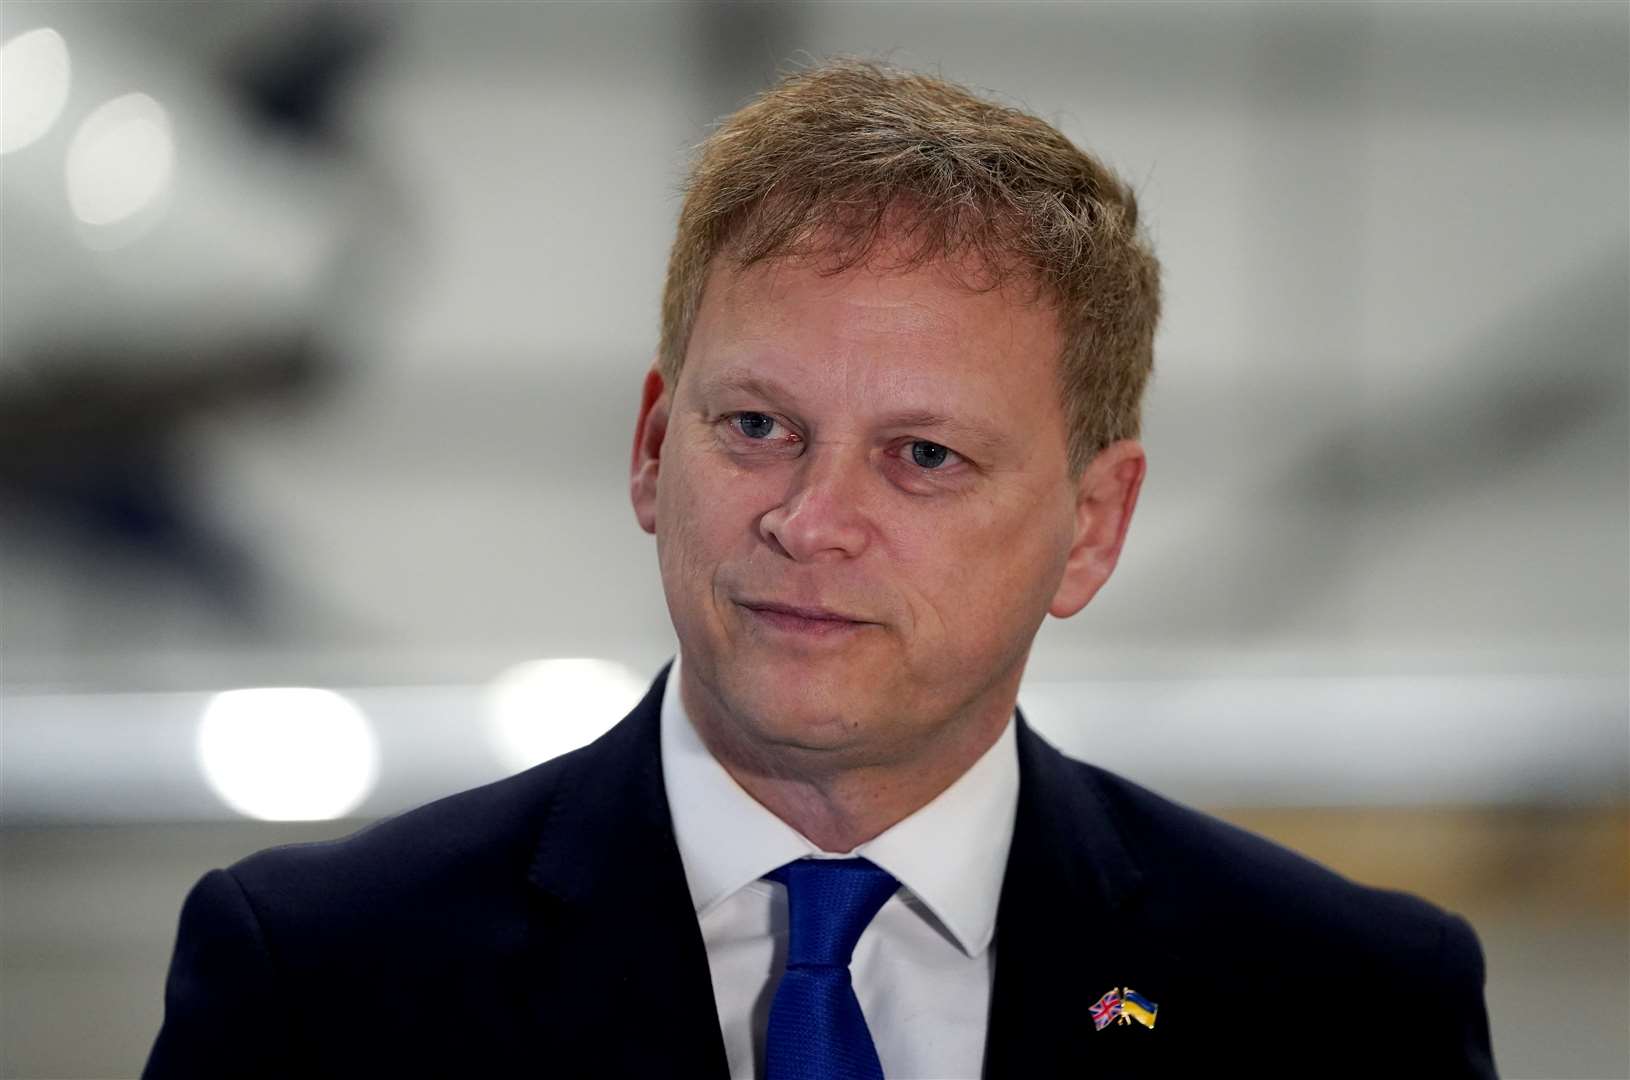 Transport Secretary Grant Shapps said ‘it’s time we clamp down on this nuisance’ (Gareth Fuller/PA)